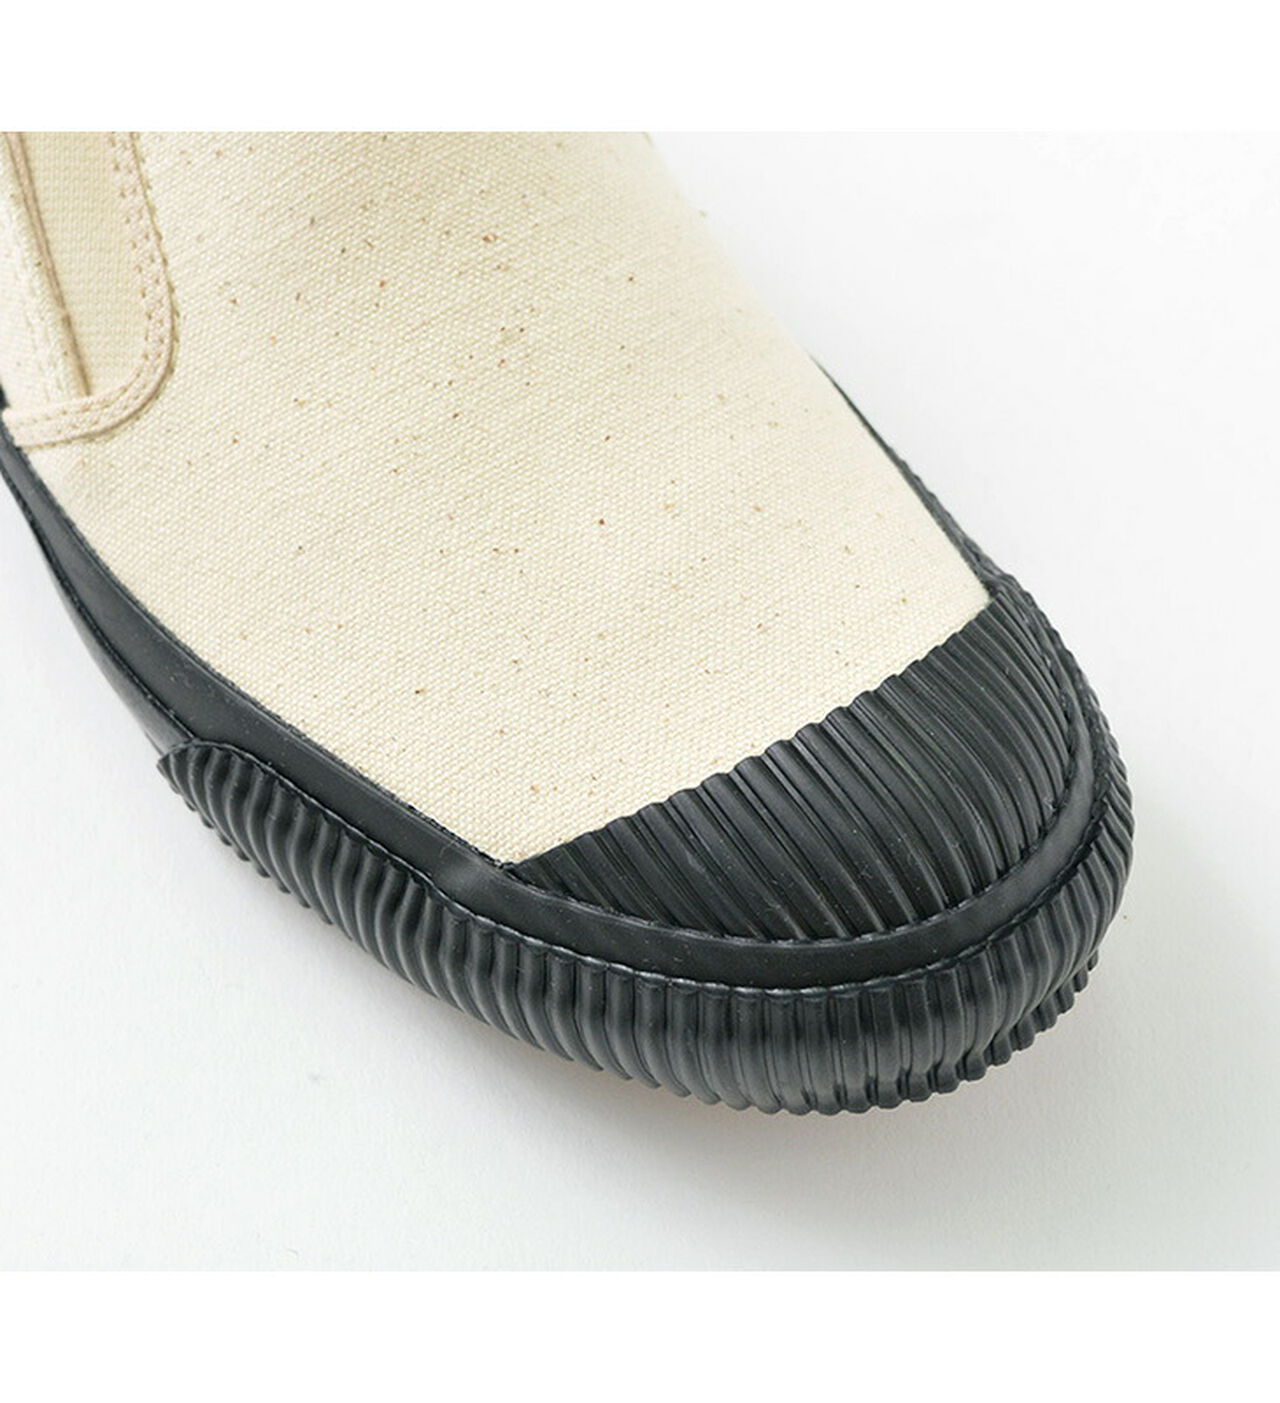 Shellcap Molded Slip-On Sneakers,, large image number 10